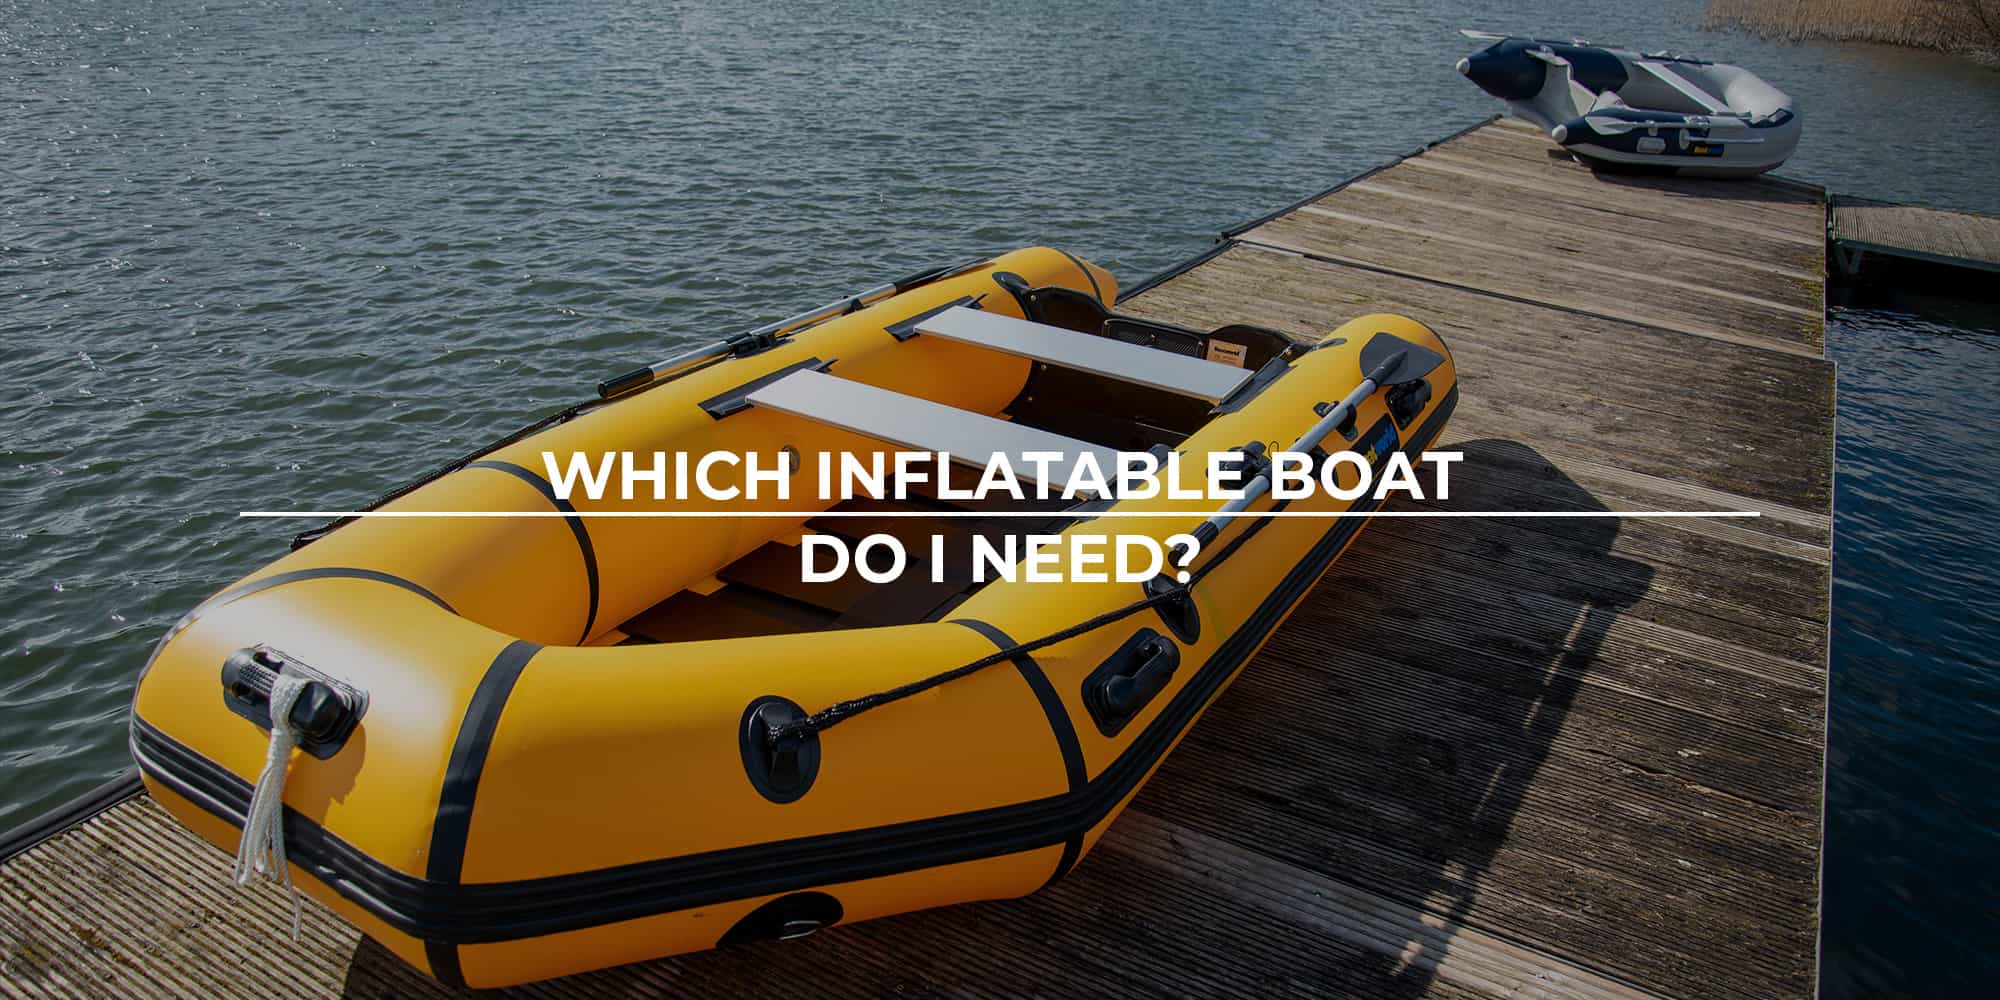 Which Inflatable Boat do I need?